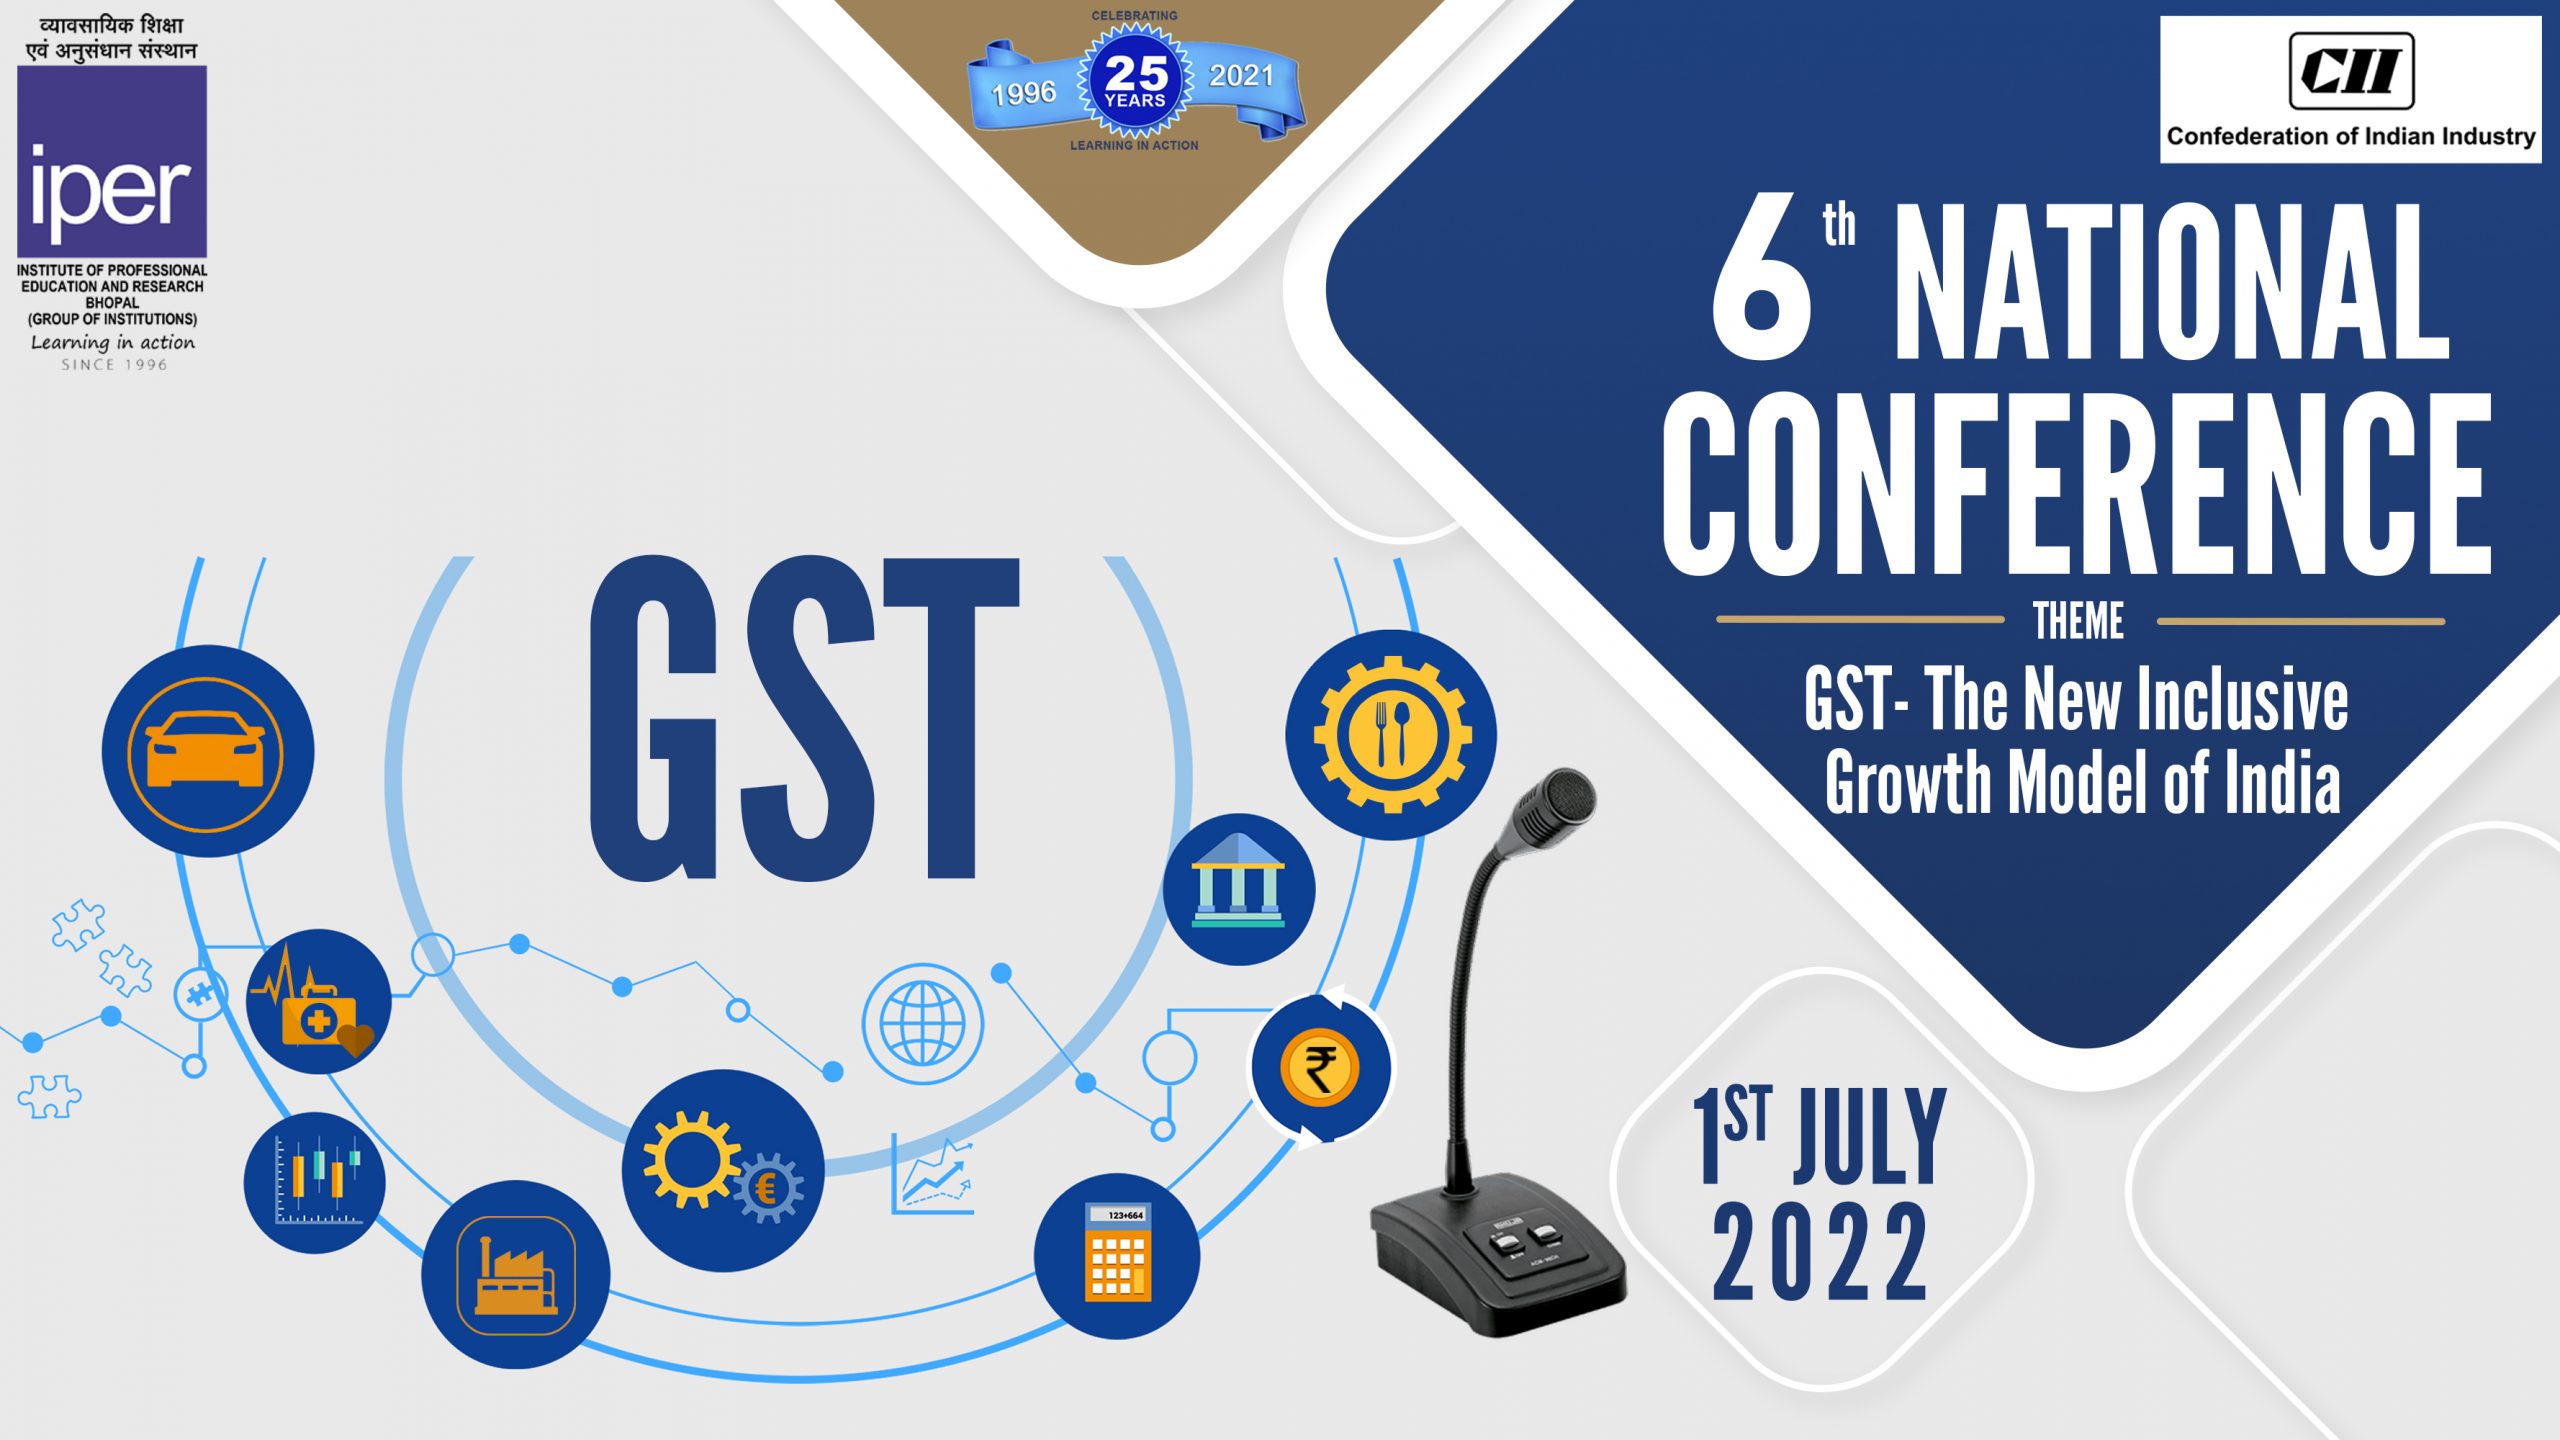 IPER’s 6th National Conference on 1st July 2022